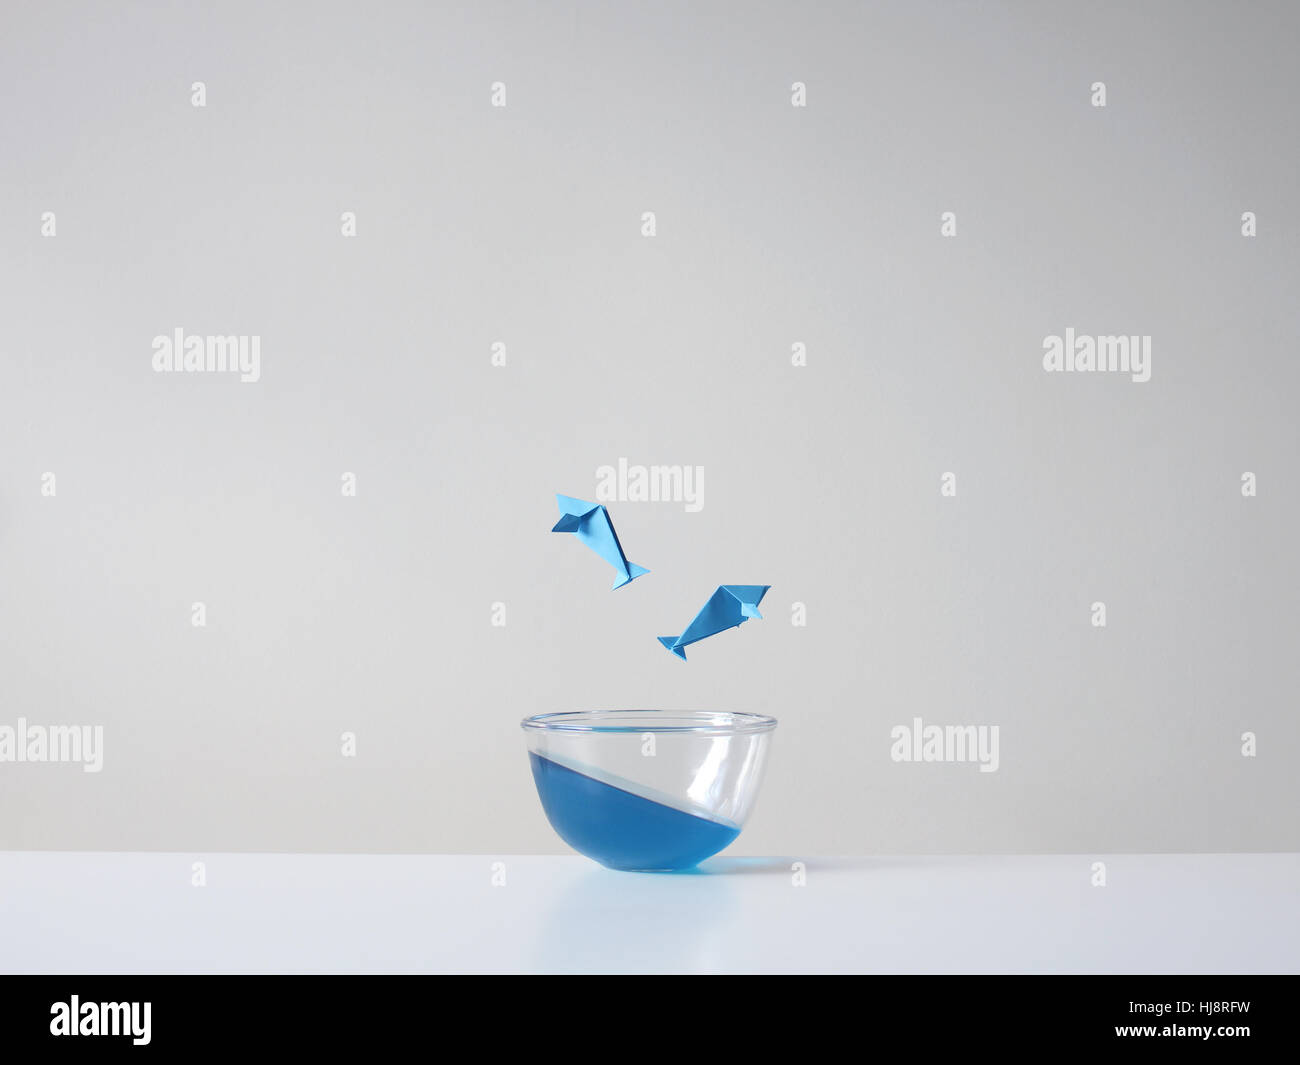 Conceptual fish jumping out of water in a glass bowl Stock Photo